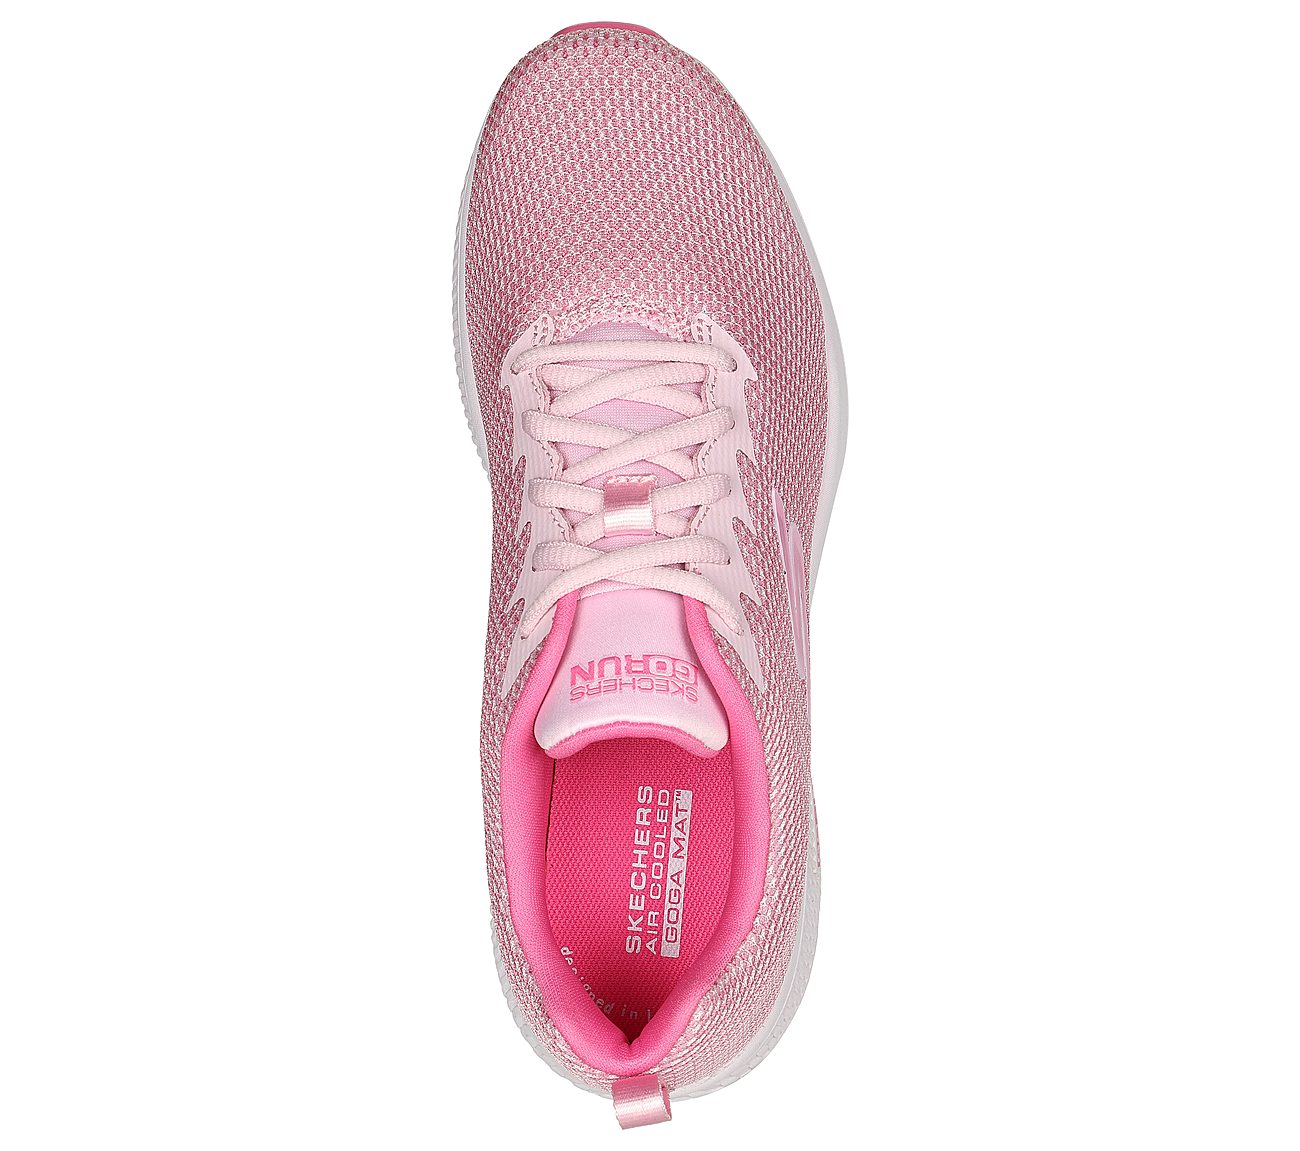 GO RUN CONSISTENT, PPINK Footwear Top View